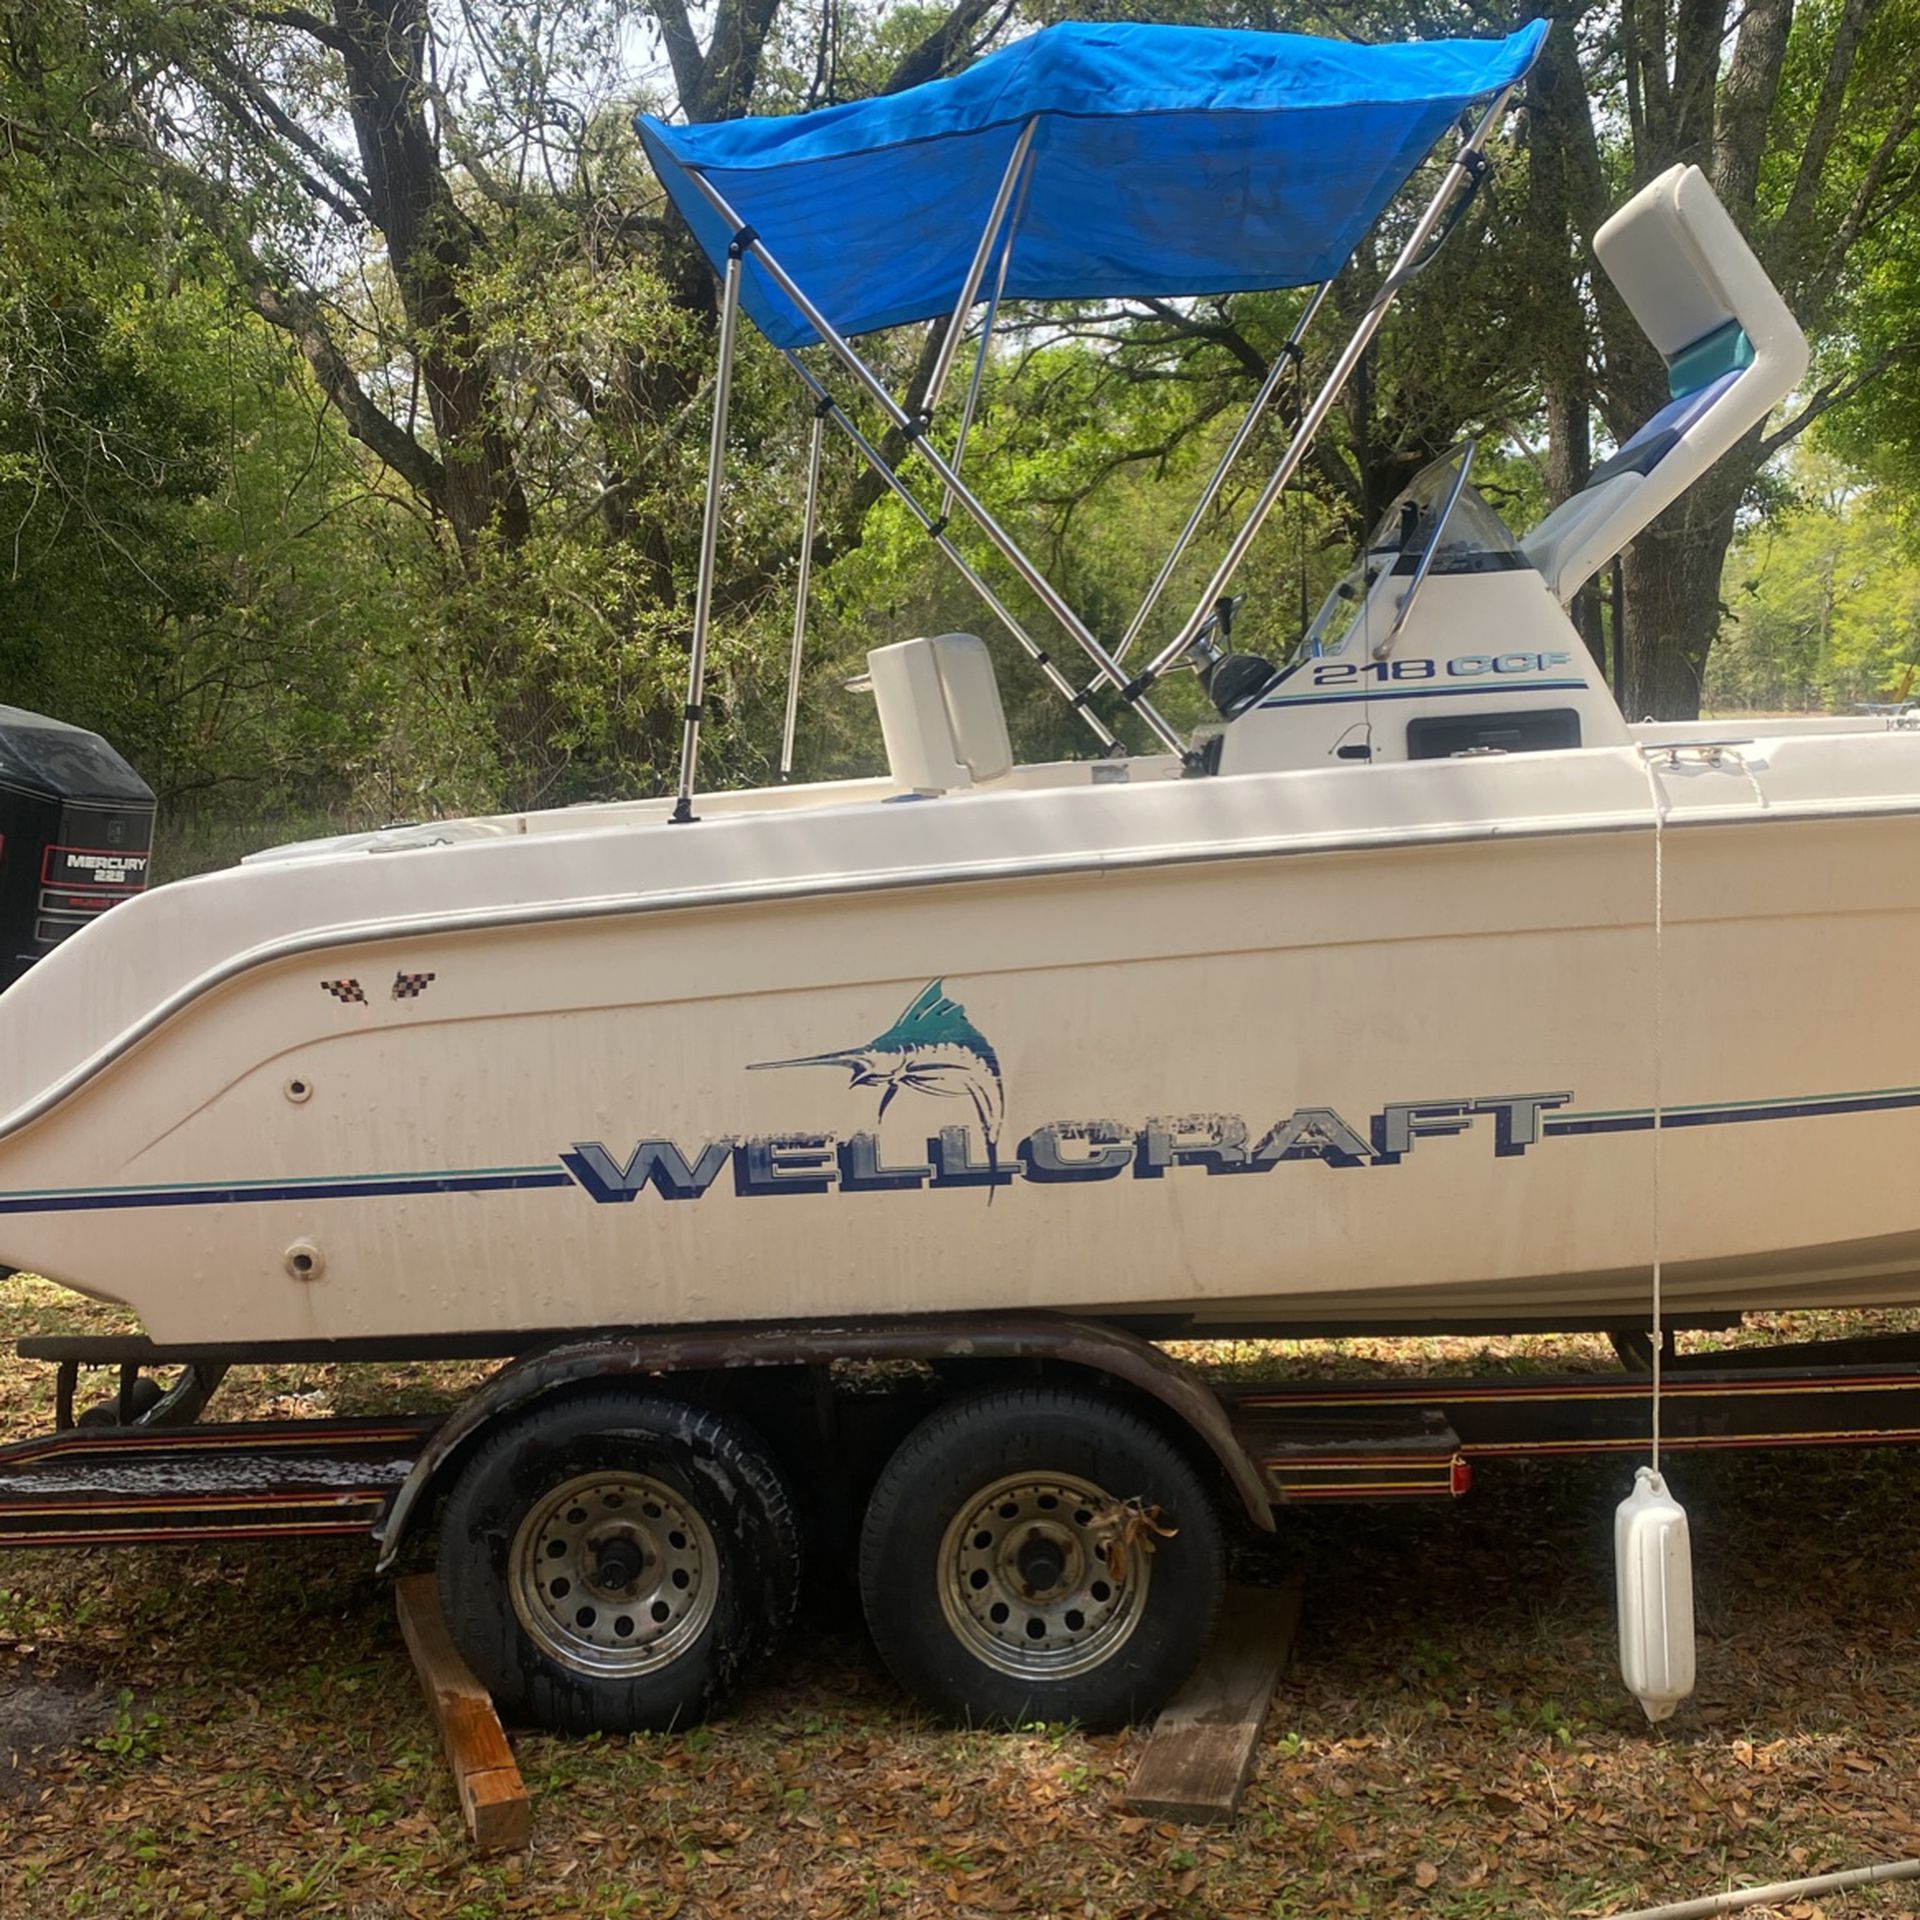 Photo For Sale 95 Wellcraft 218 Off Shore